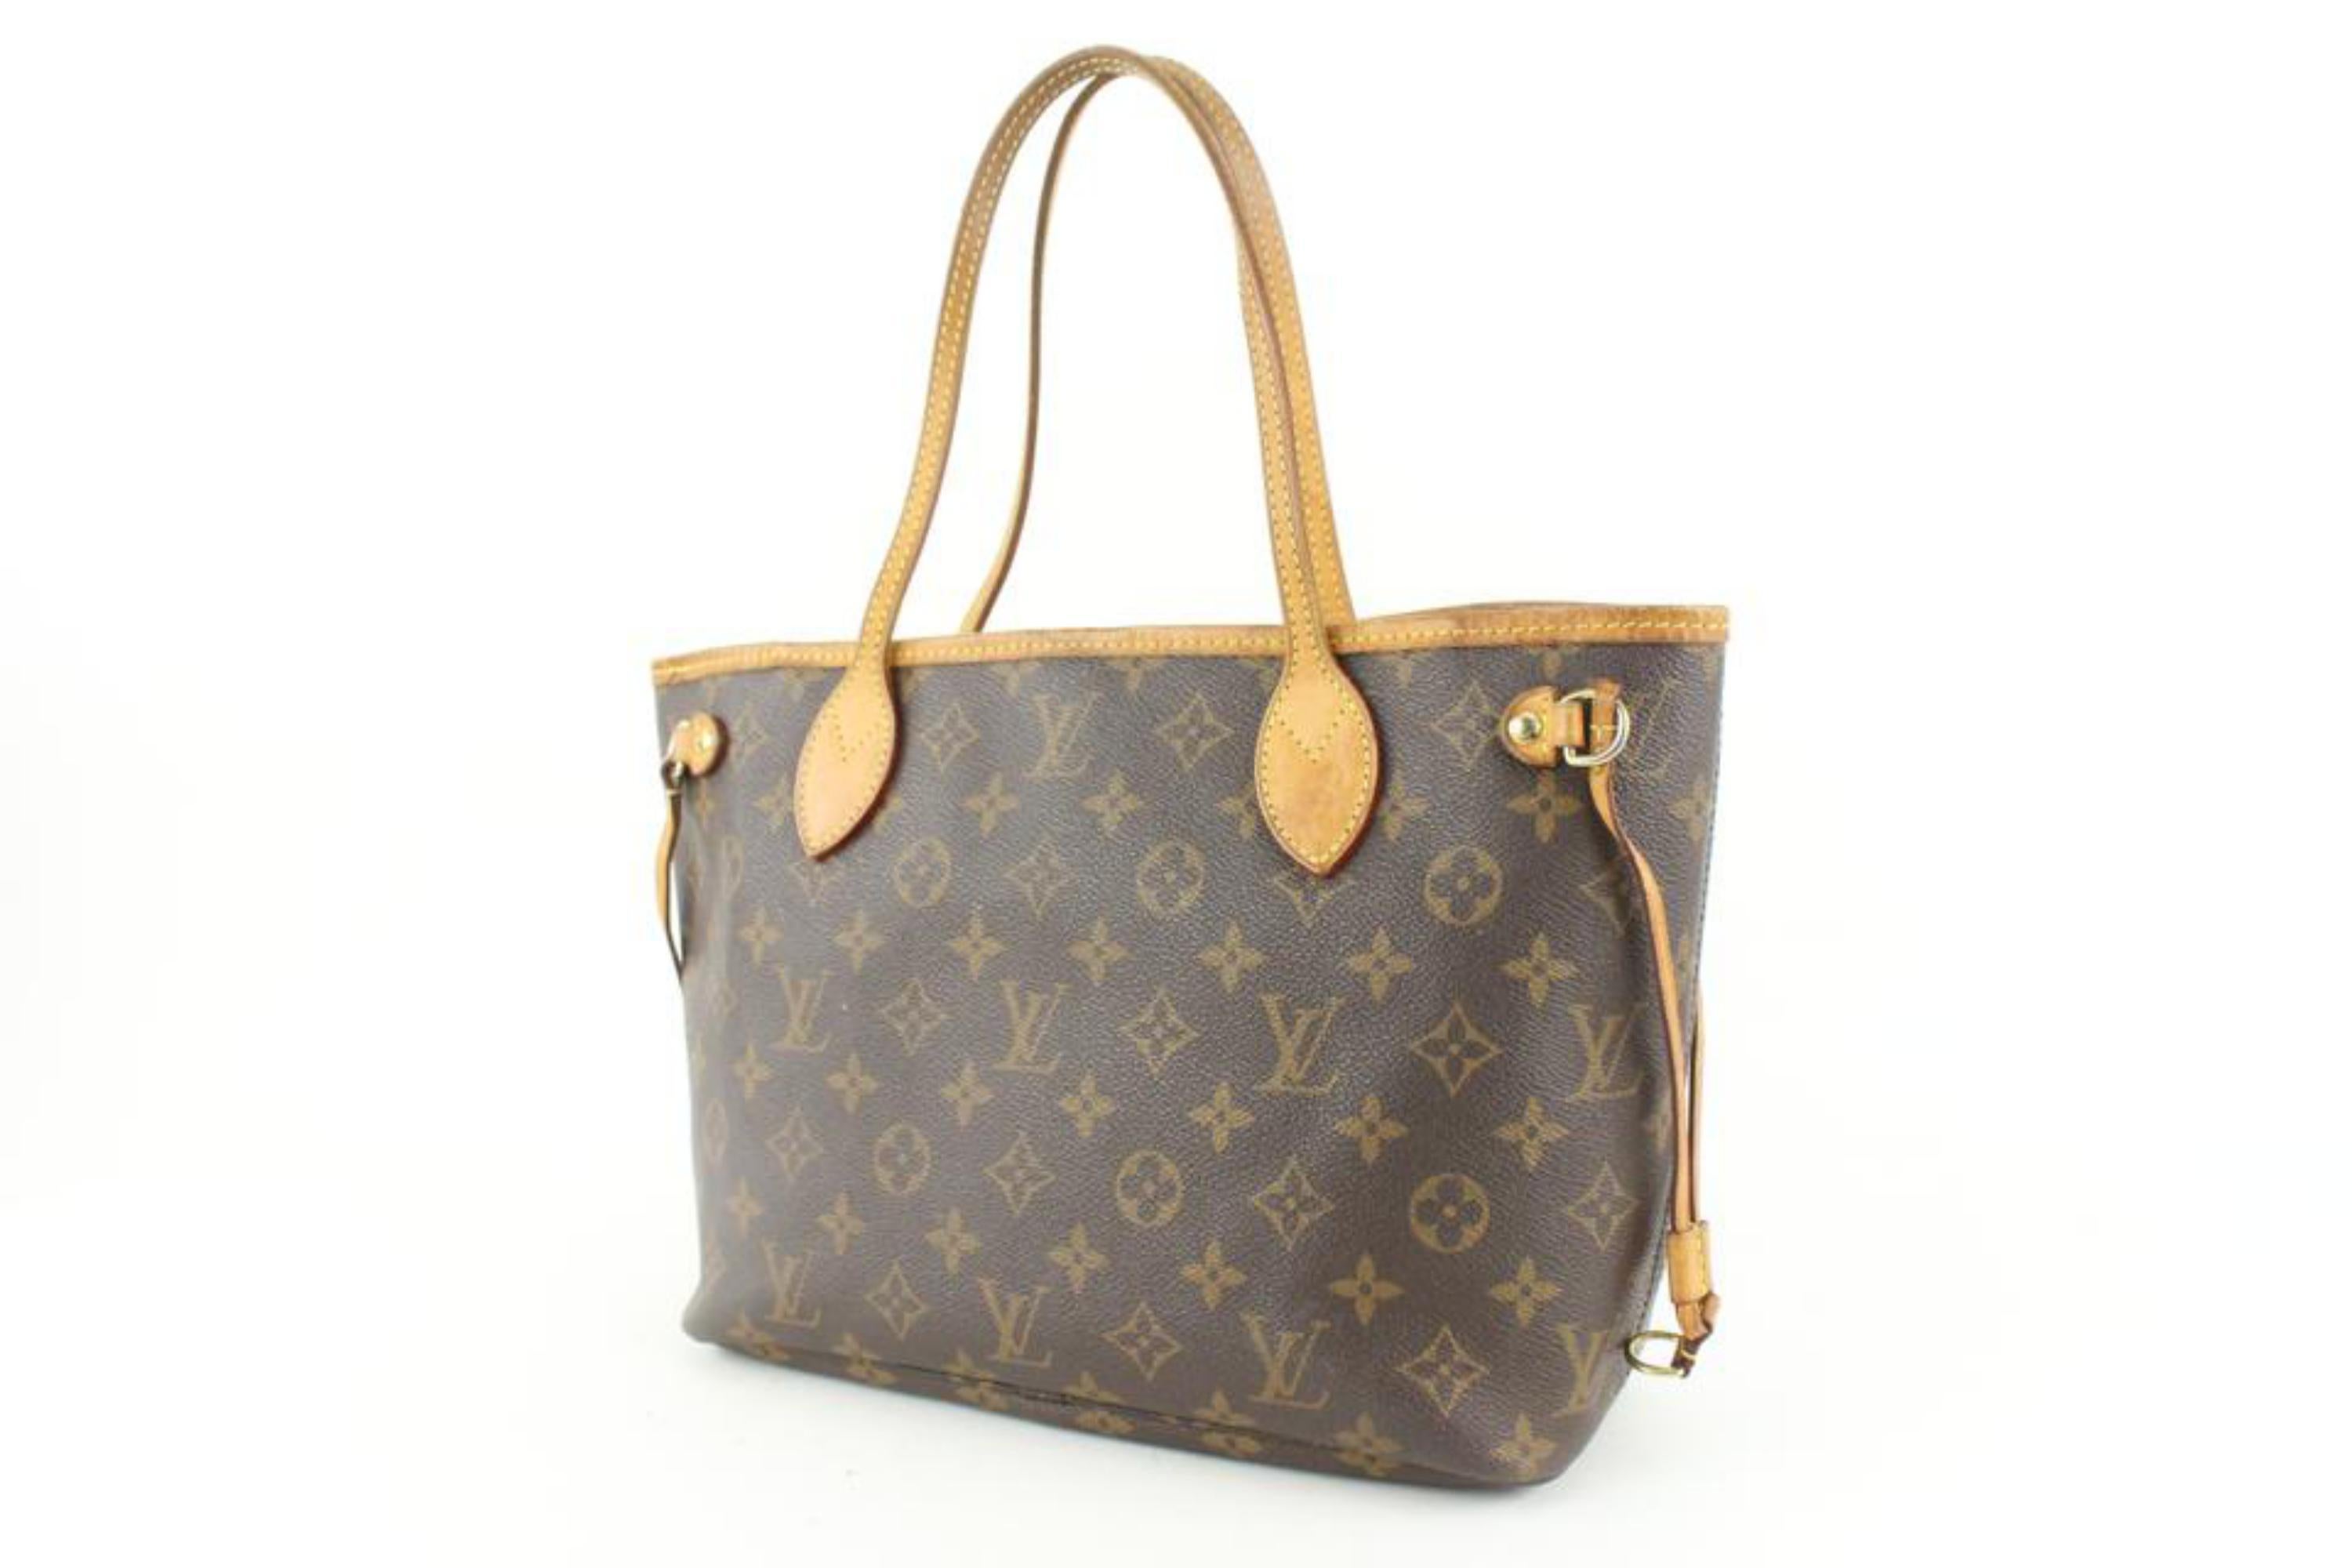 Louis Vuitton Small Monogram Neverfull PM Tote bag 16lv41
Date Code/Serial Number: VI3009
Made In: France
Measurements: Length:  14.5